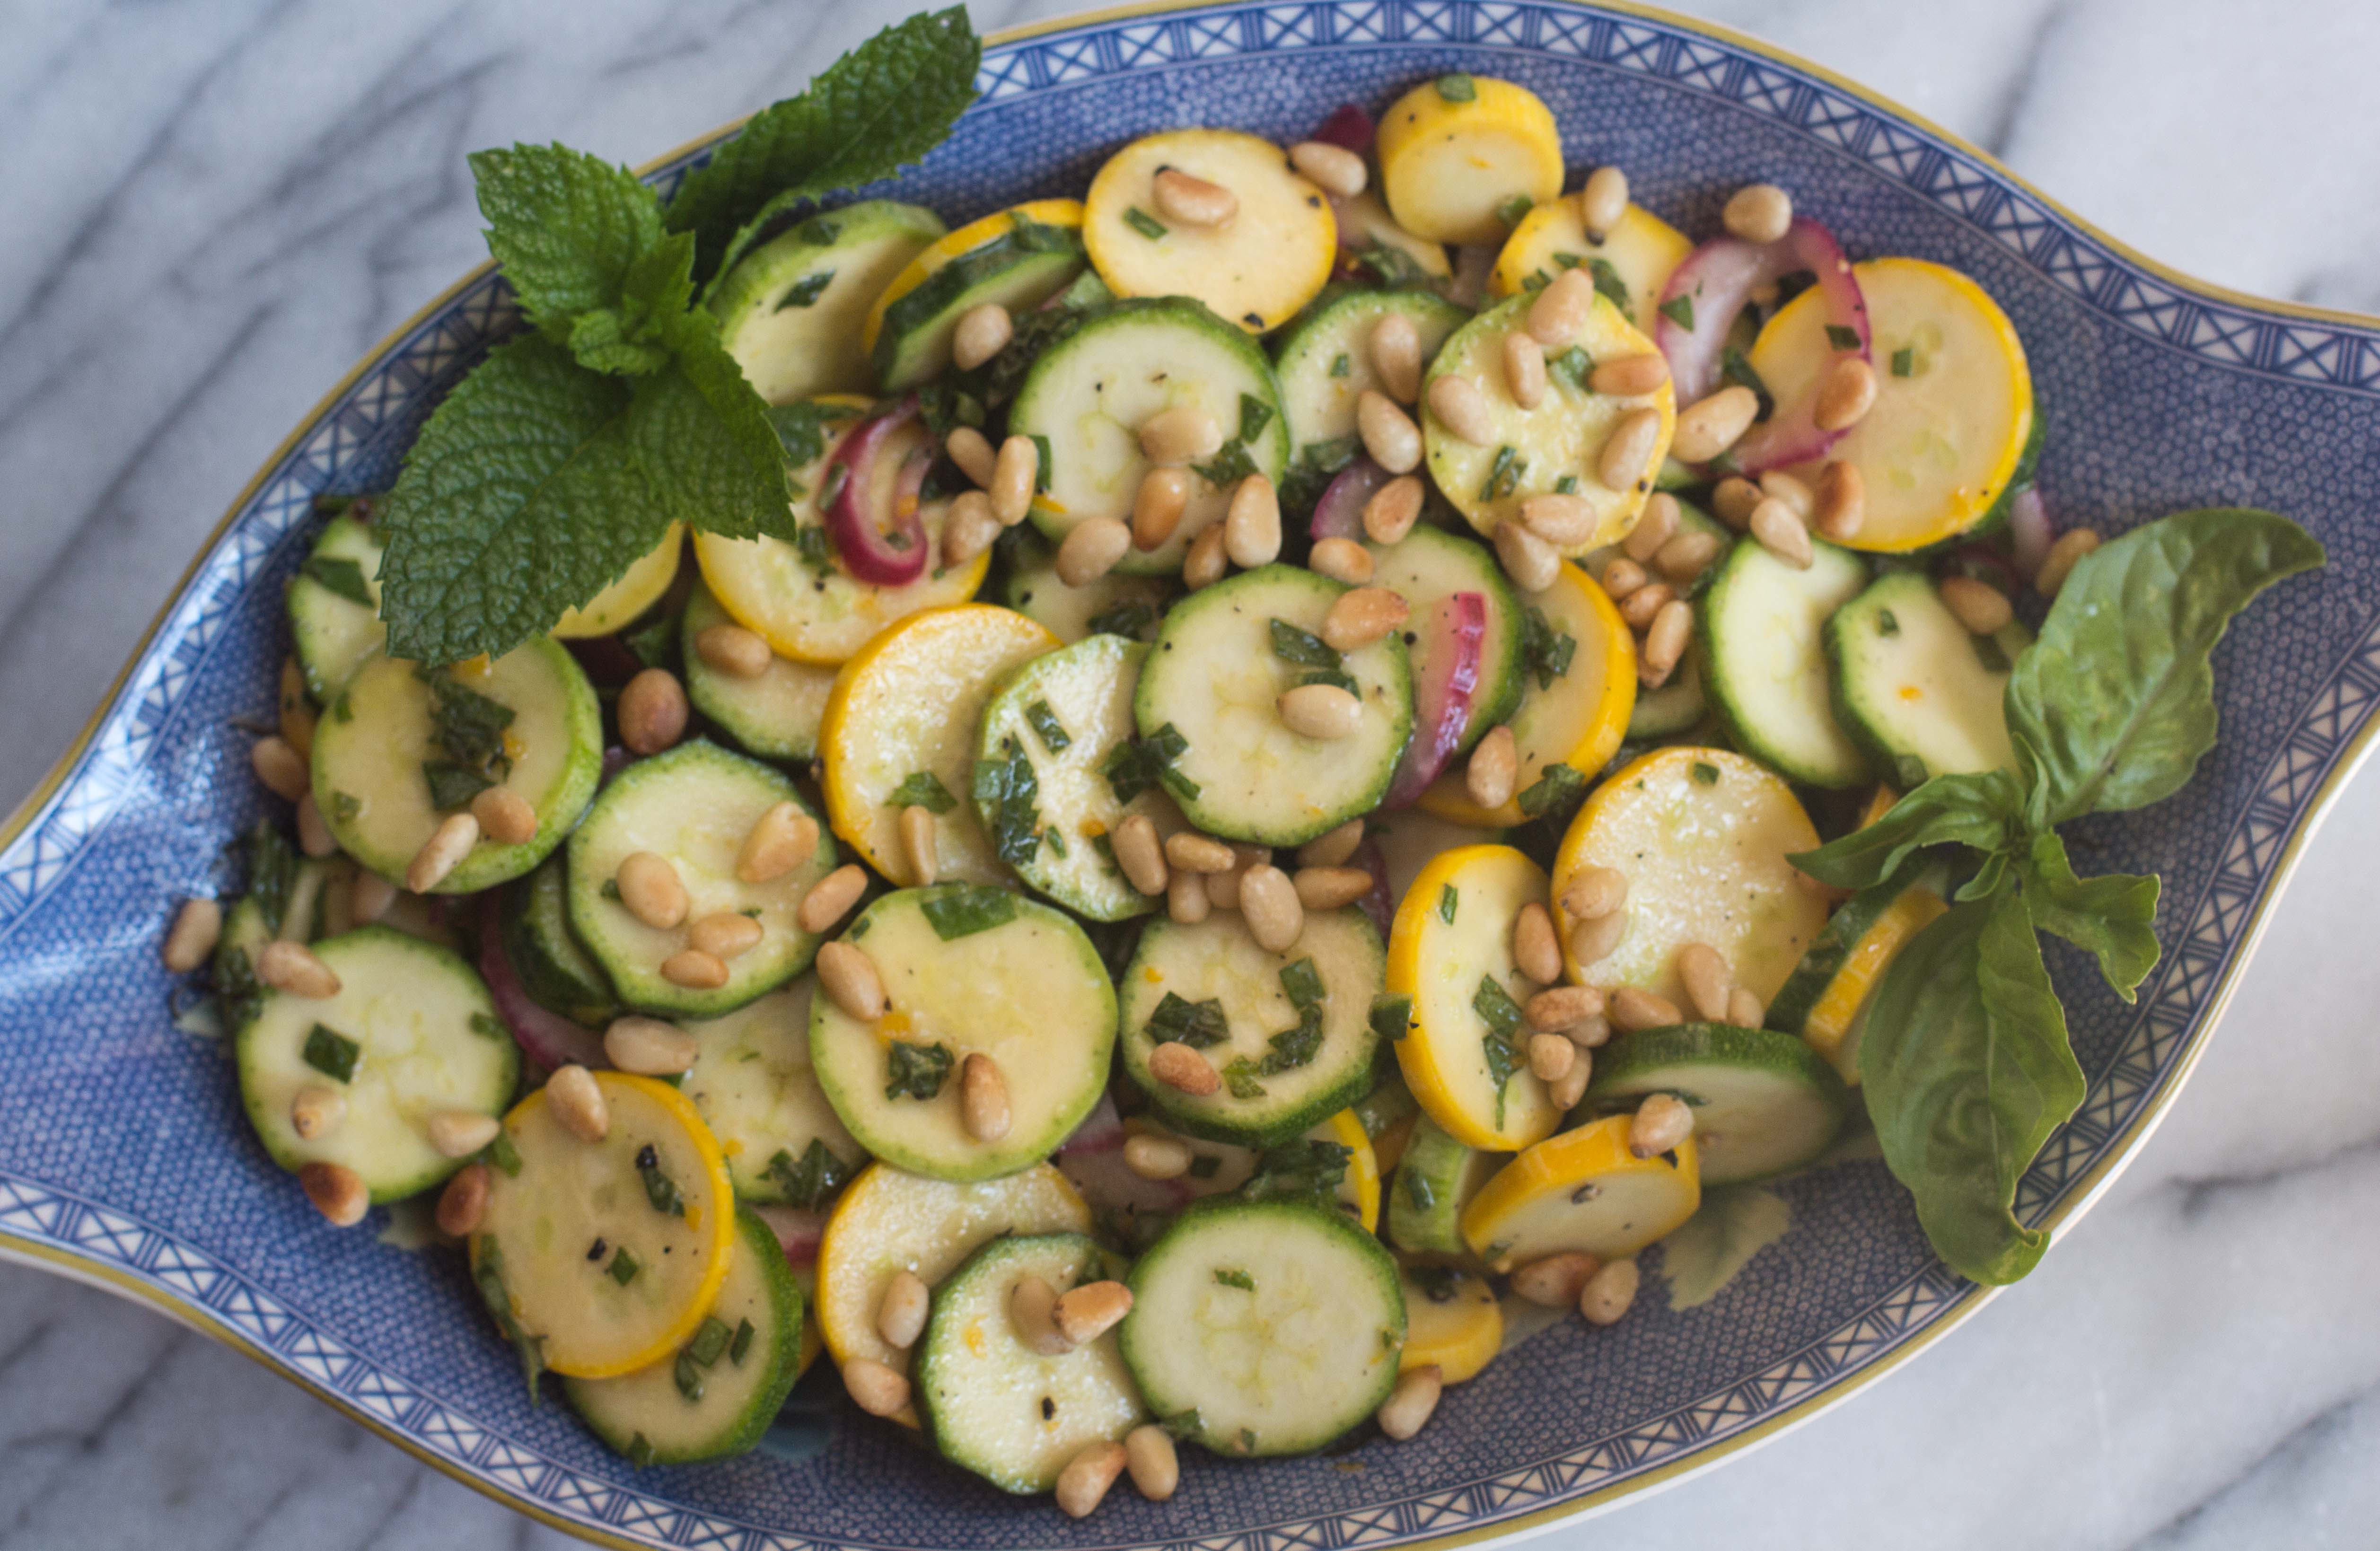 Salad of Zucchini Coins with Basil and Mint